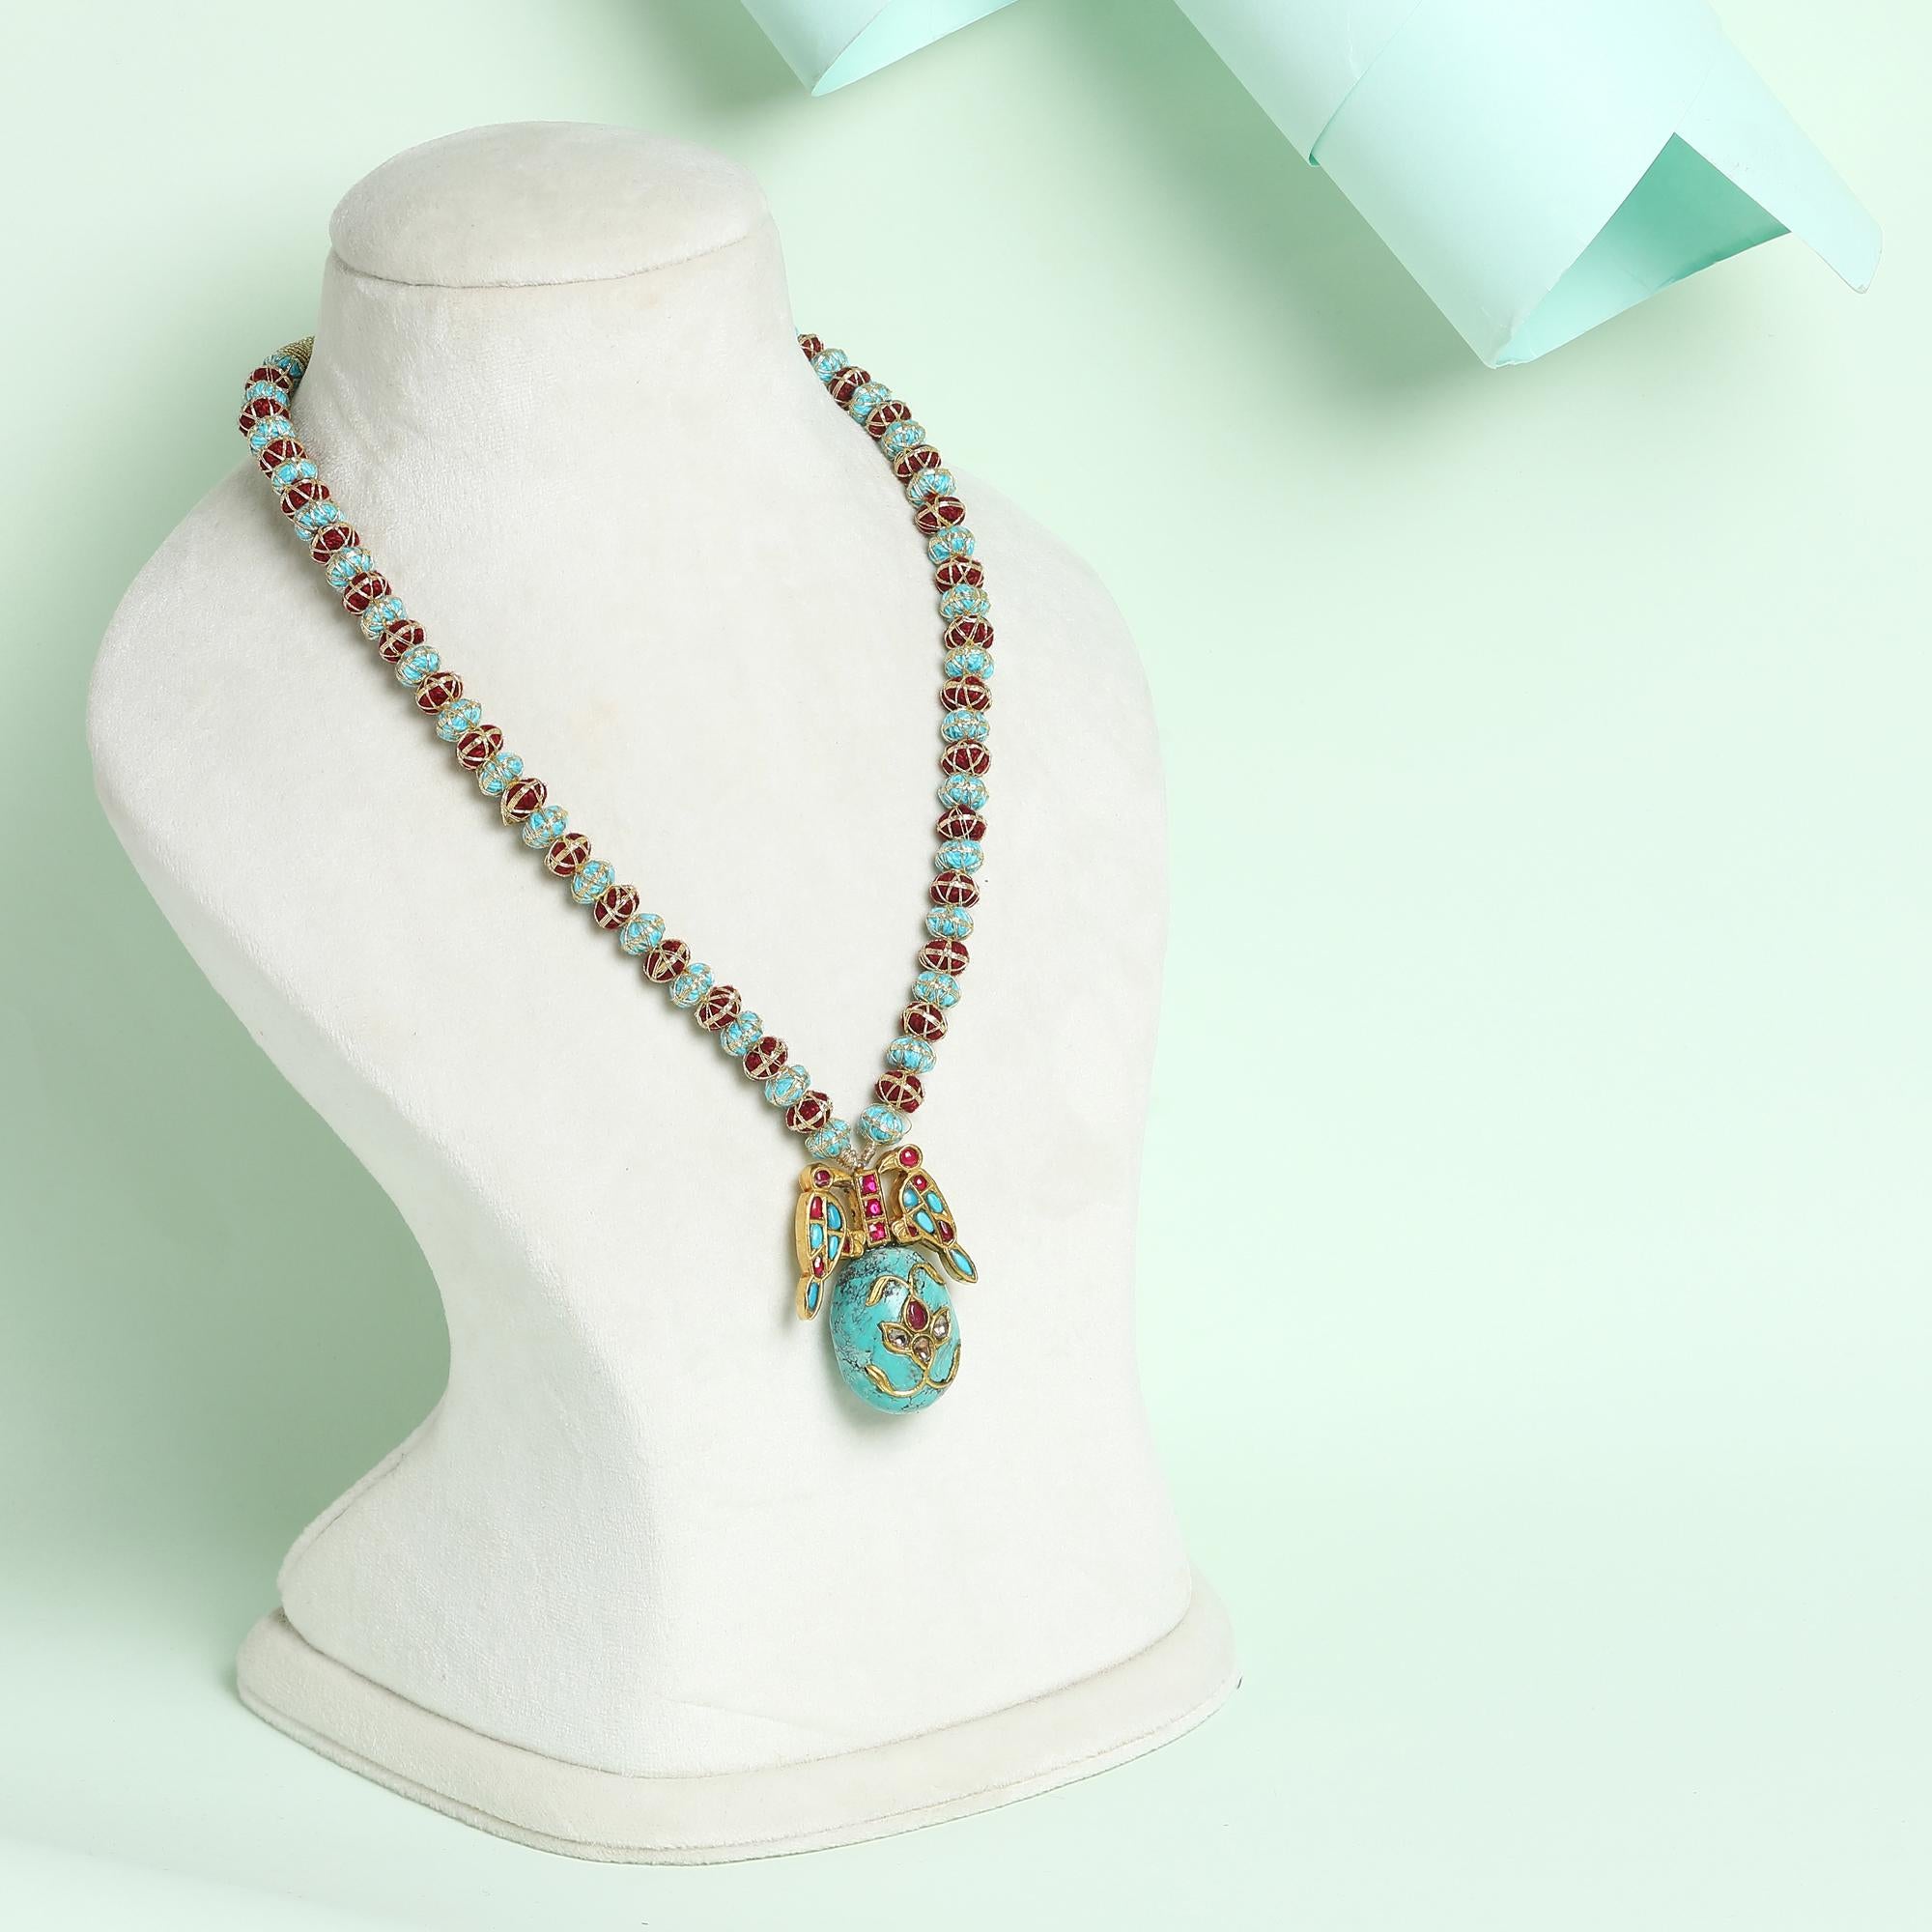 Strung on a  hand woven necklace of golden silk thread with artistic knots, this Turquoise stone bird motif pendant is encrusted with Polki diamonds and rubies. 